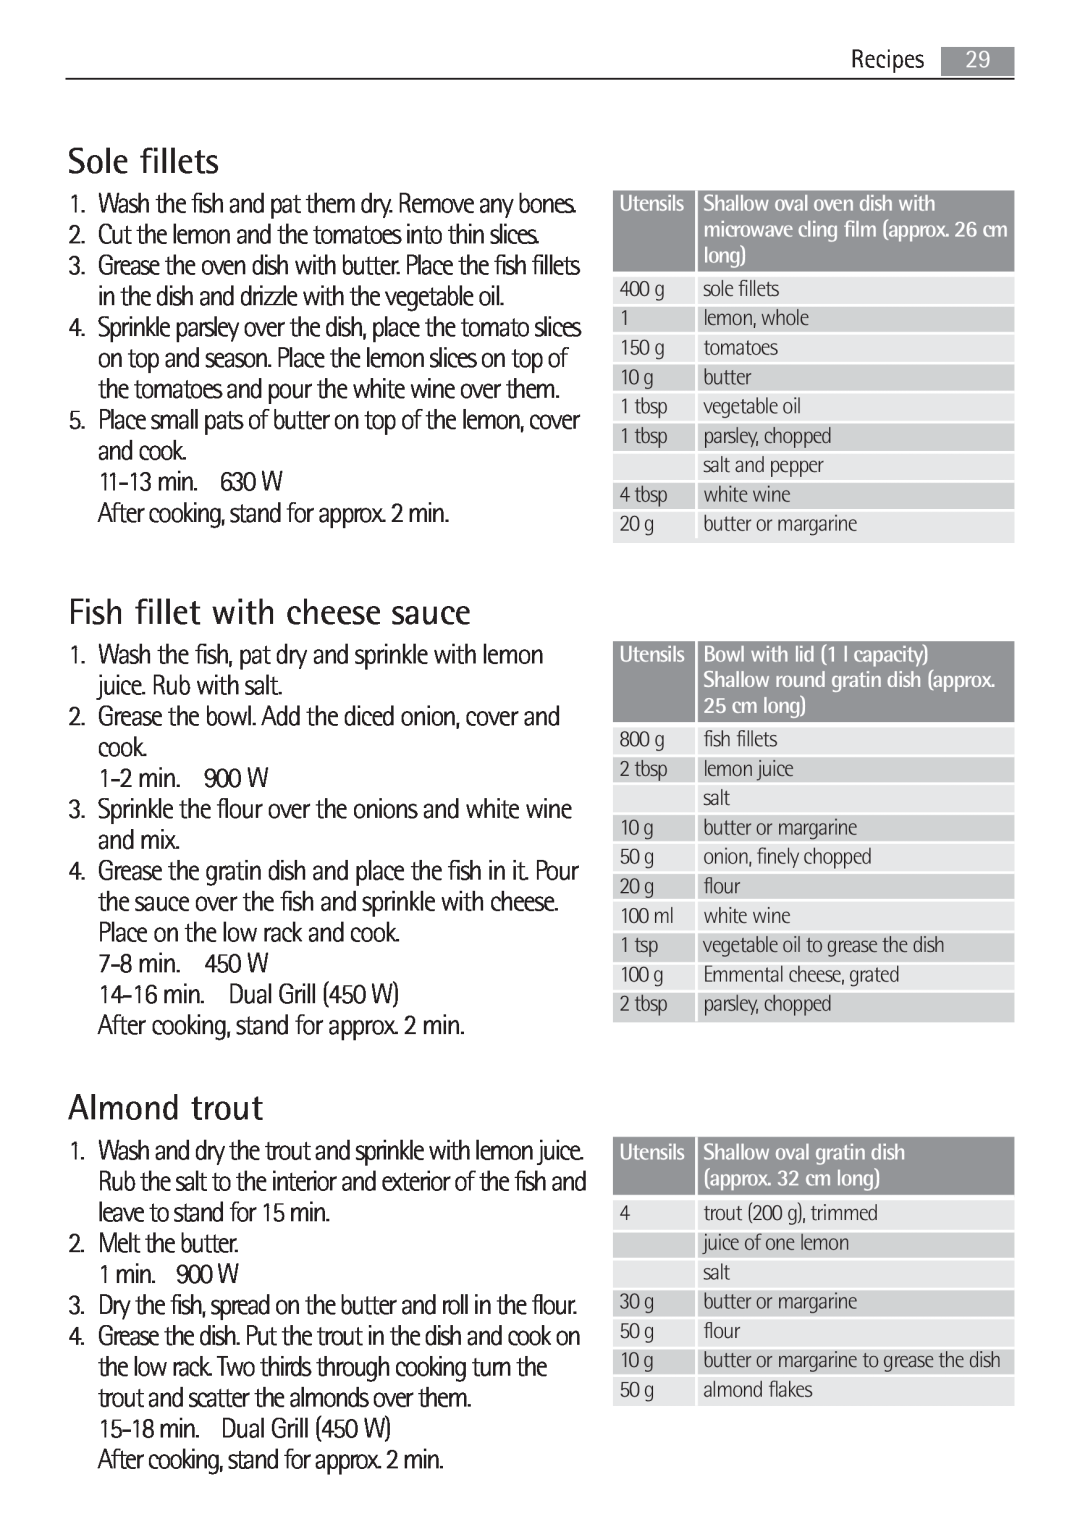 AEG MCD2662E user manual Sole fillets, Fish fillet with cheese sauce, Almond trout 